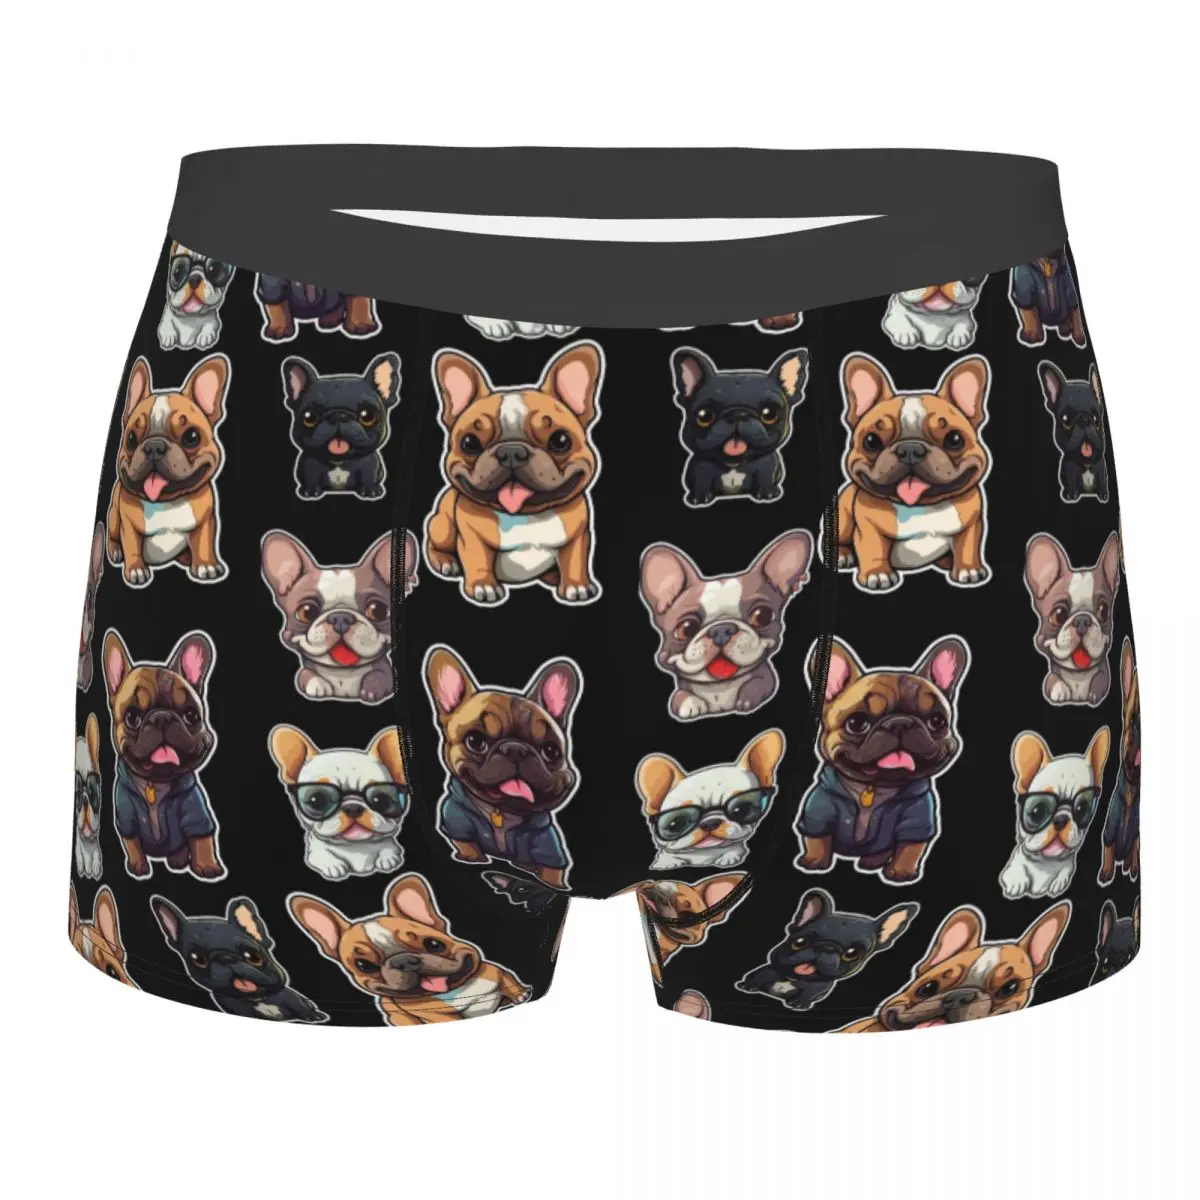 pattern Cute Pets Bulldog Mencosy Boxer Briefs Underwear Highly Breathable Top Quality Gift Idea